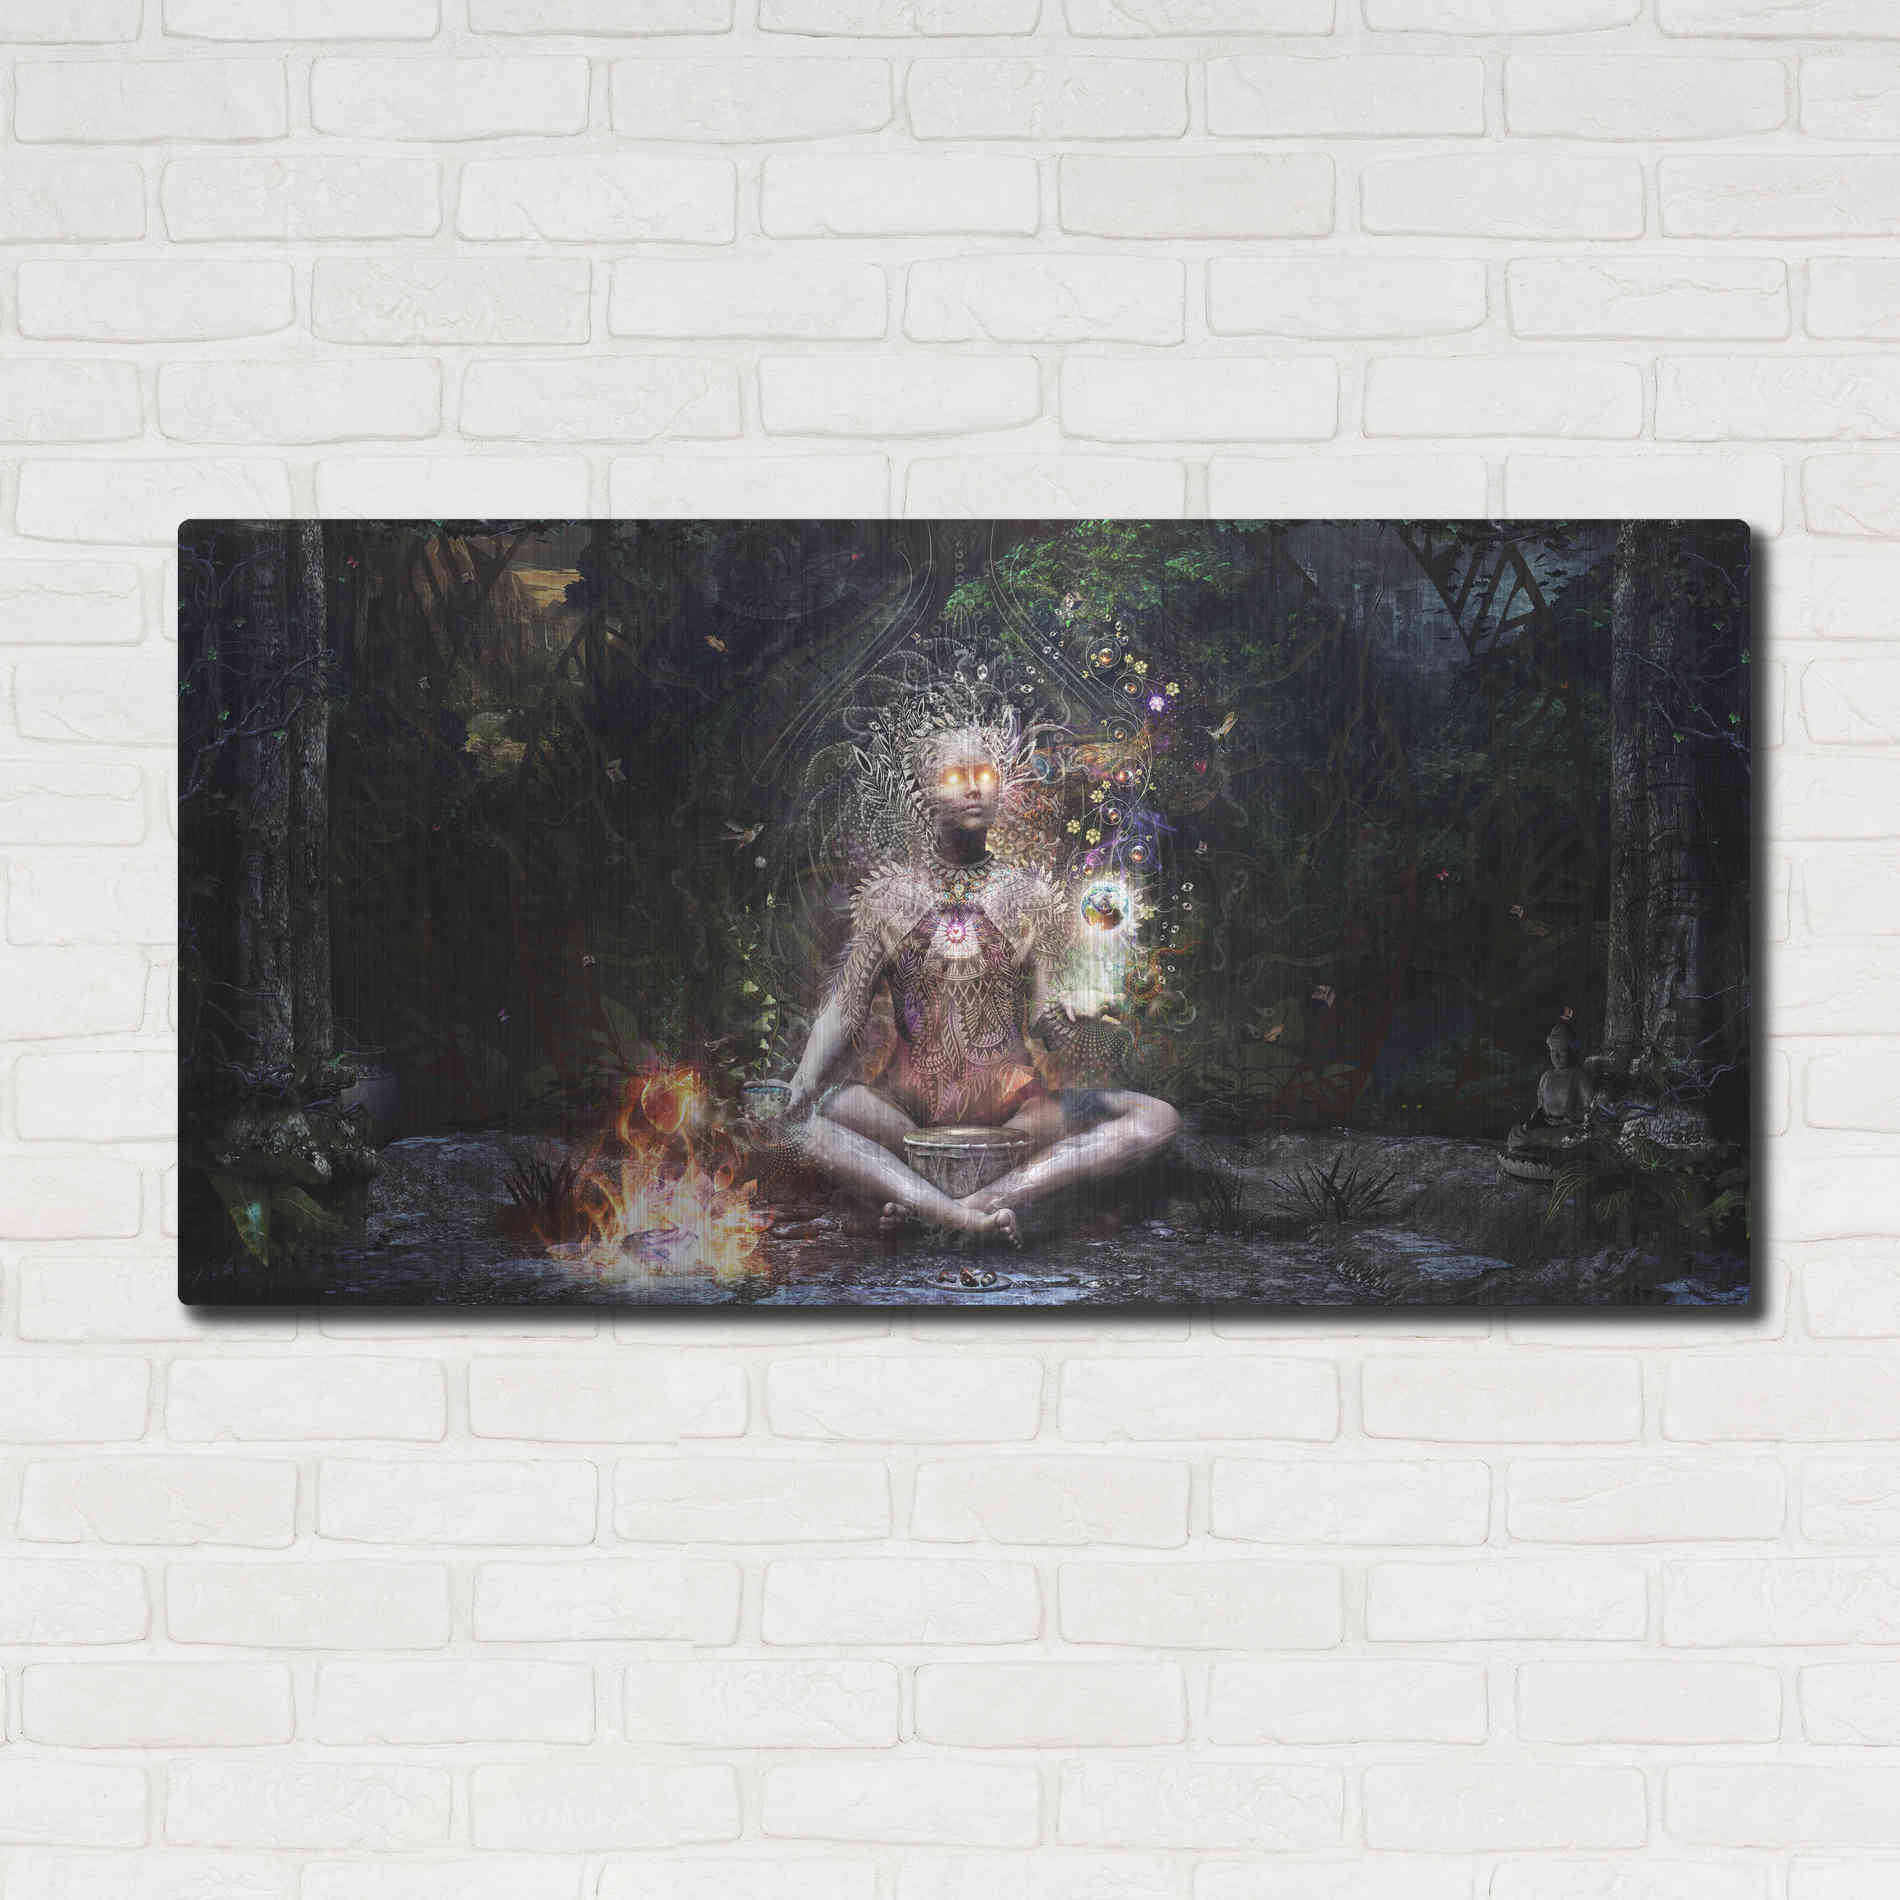 Luxe Metal Art 'Sacrament For The Sacred Dreamers' by Cameron Gray, Metal Wall Art,48x24